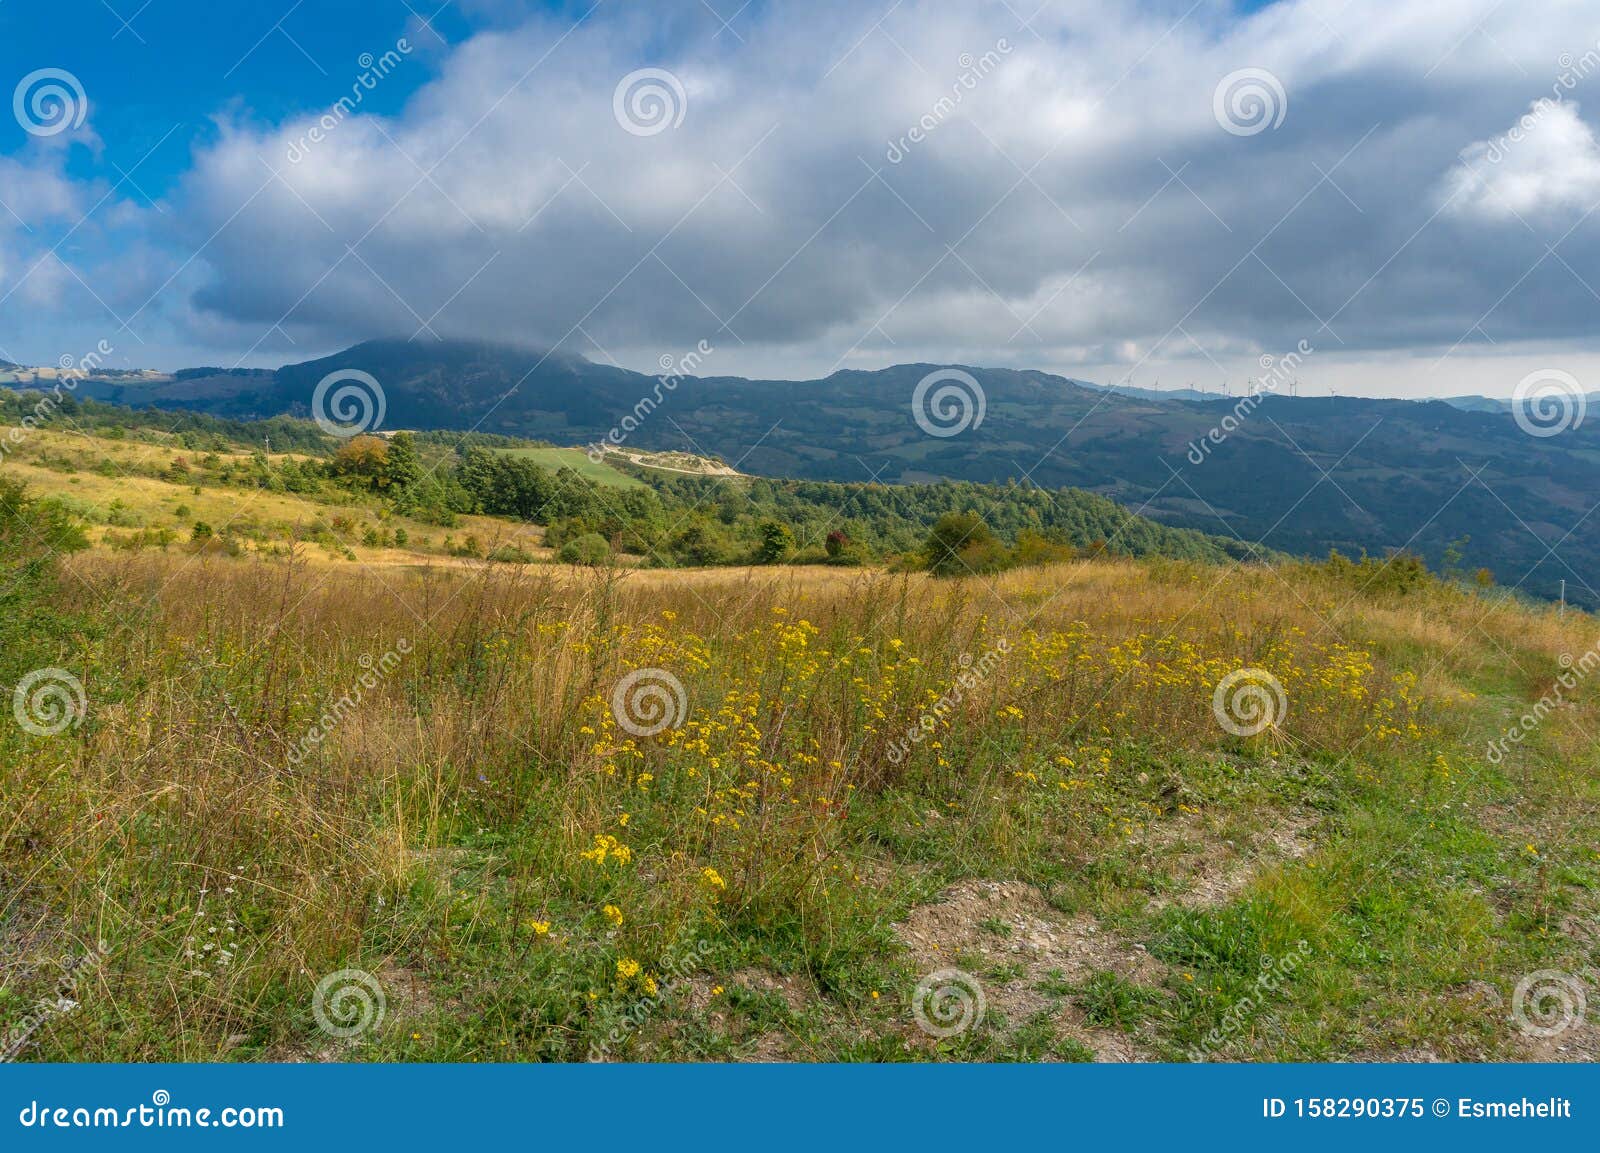 Colorful Countryside Nature Background Landscape with Mountains in the Distance Stock Image Image of bright, panorama: 158290375